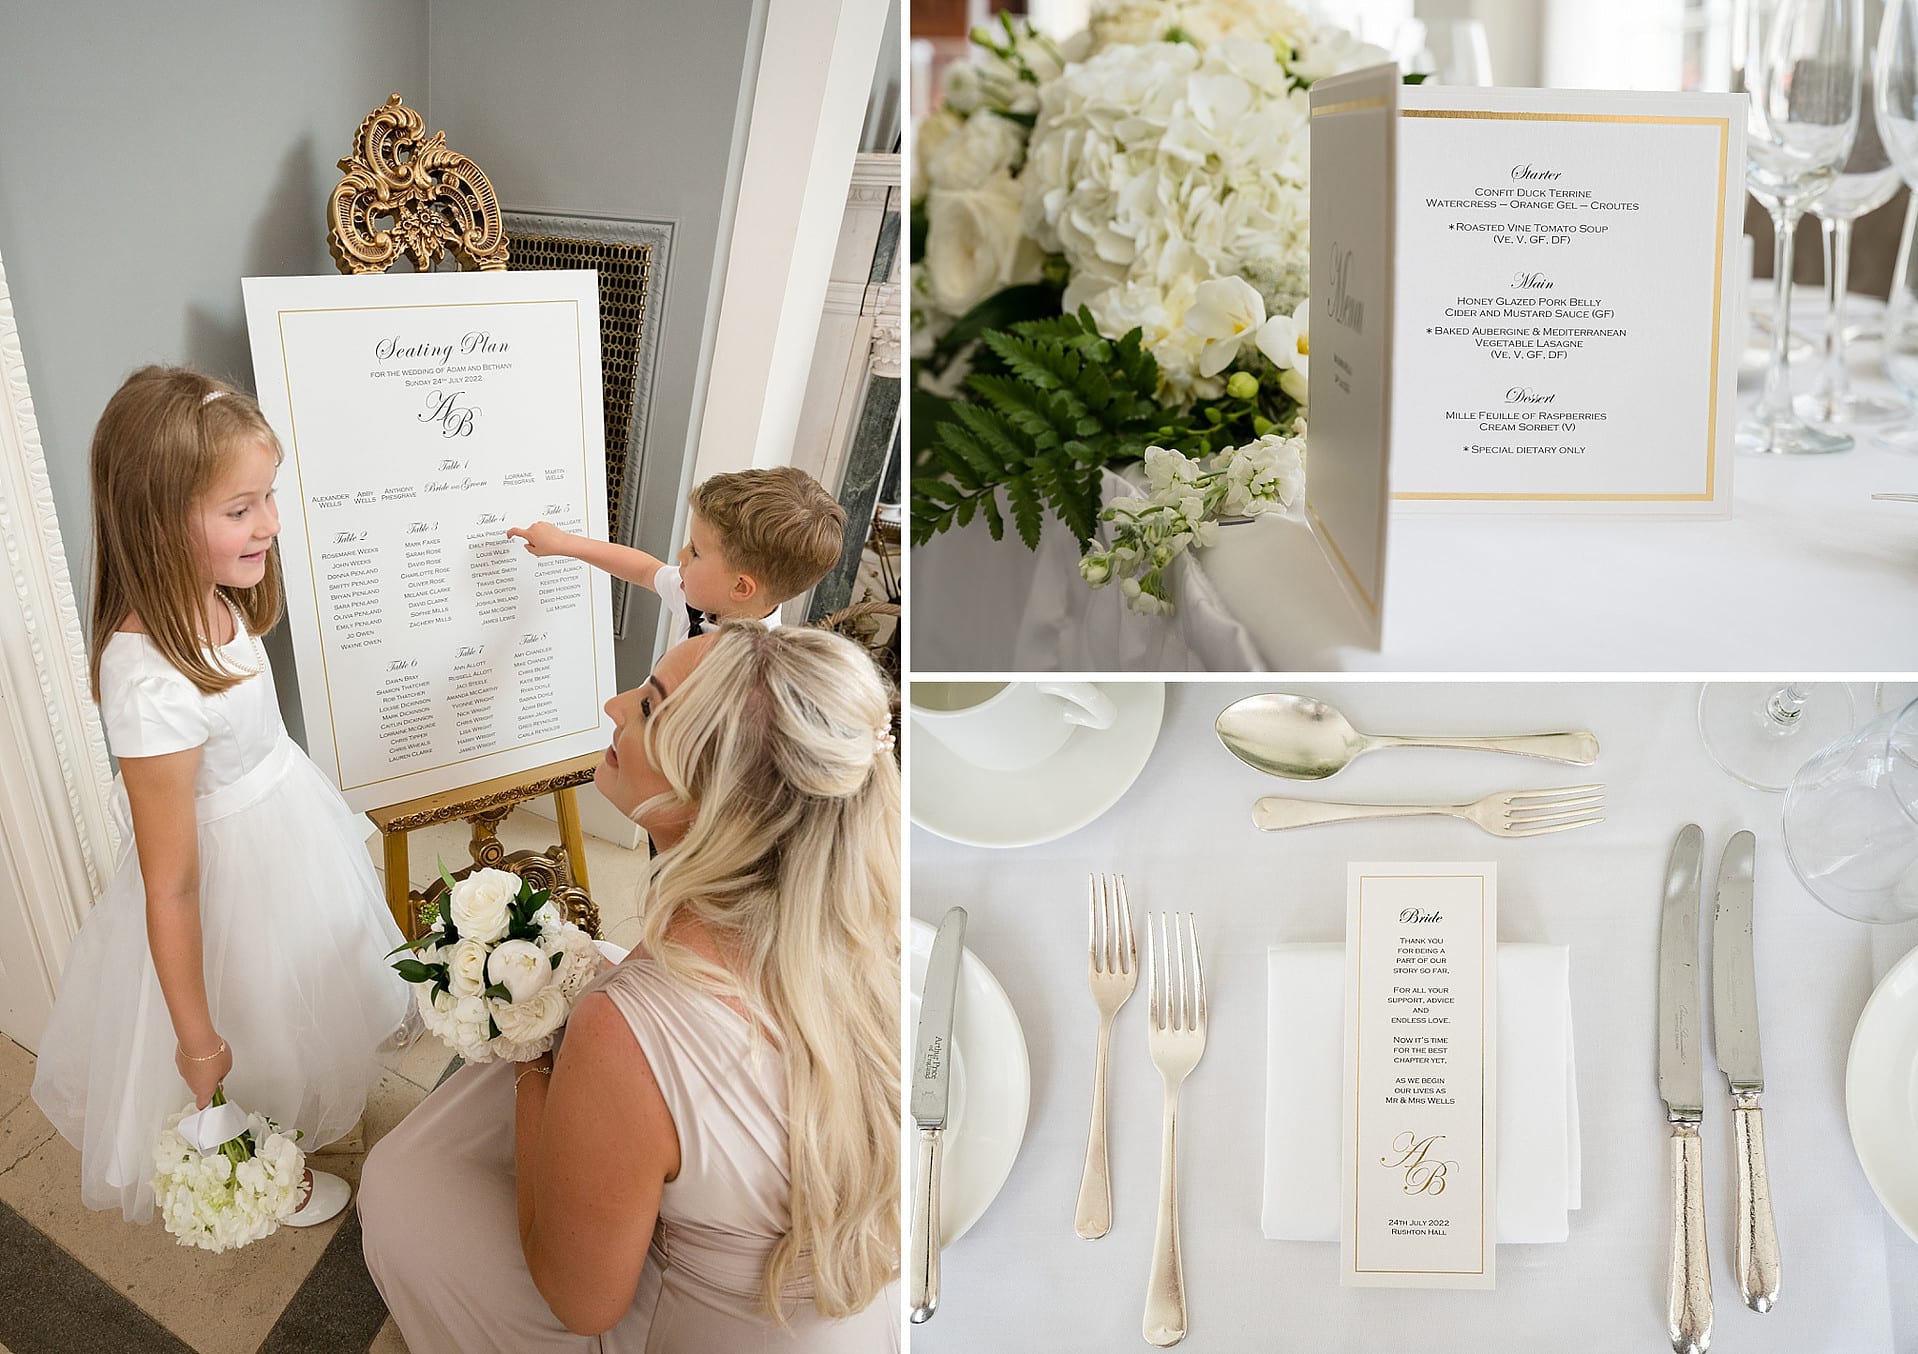 Chic white and gold tableplan, menu and placenames